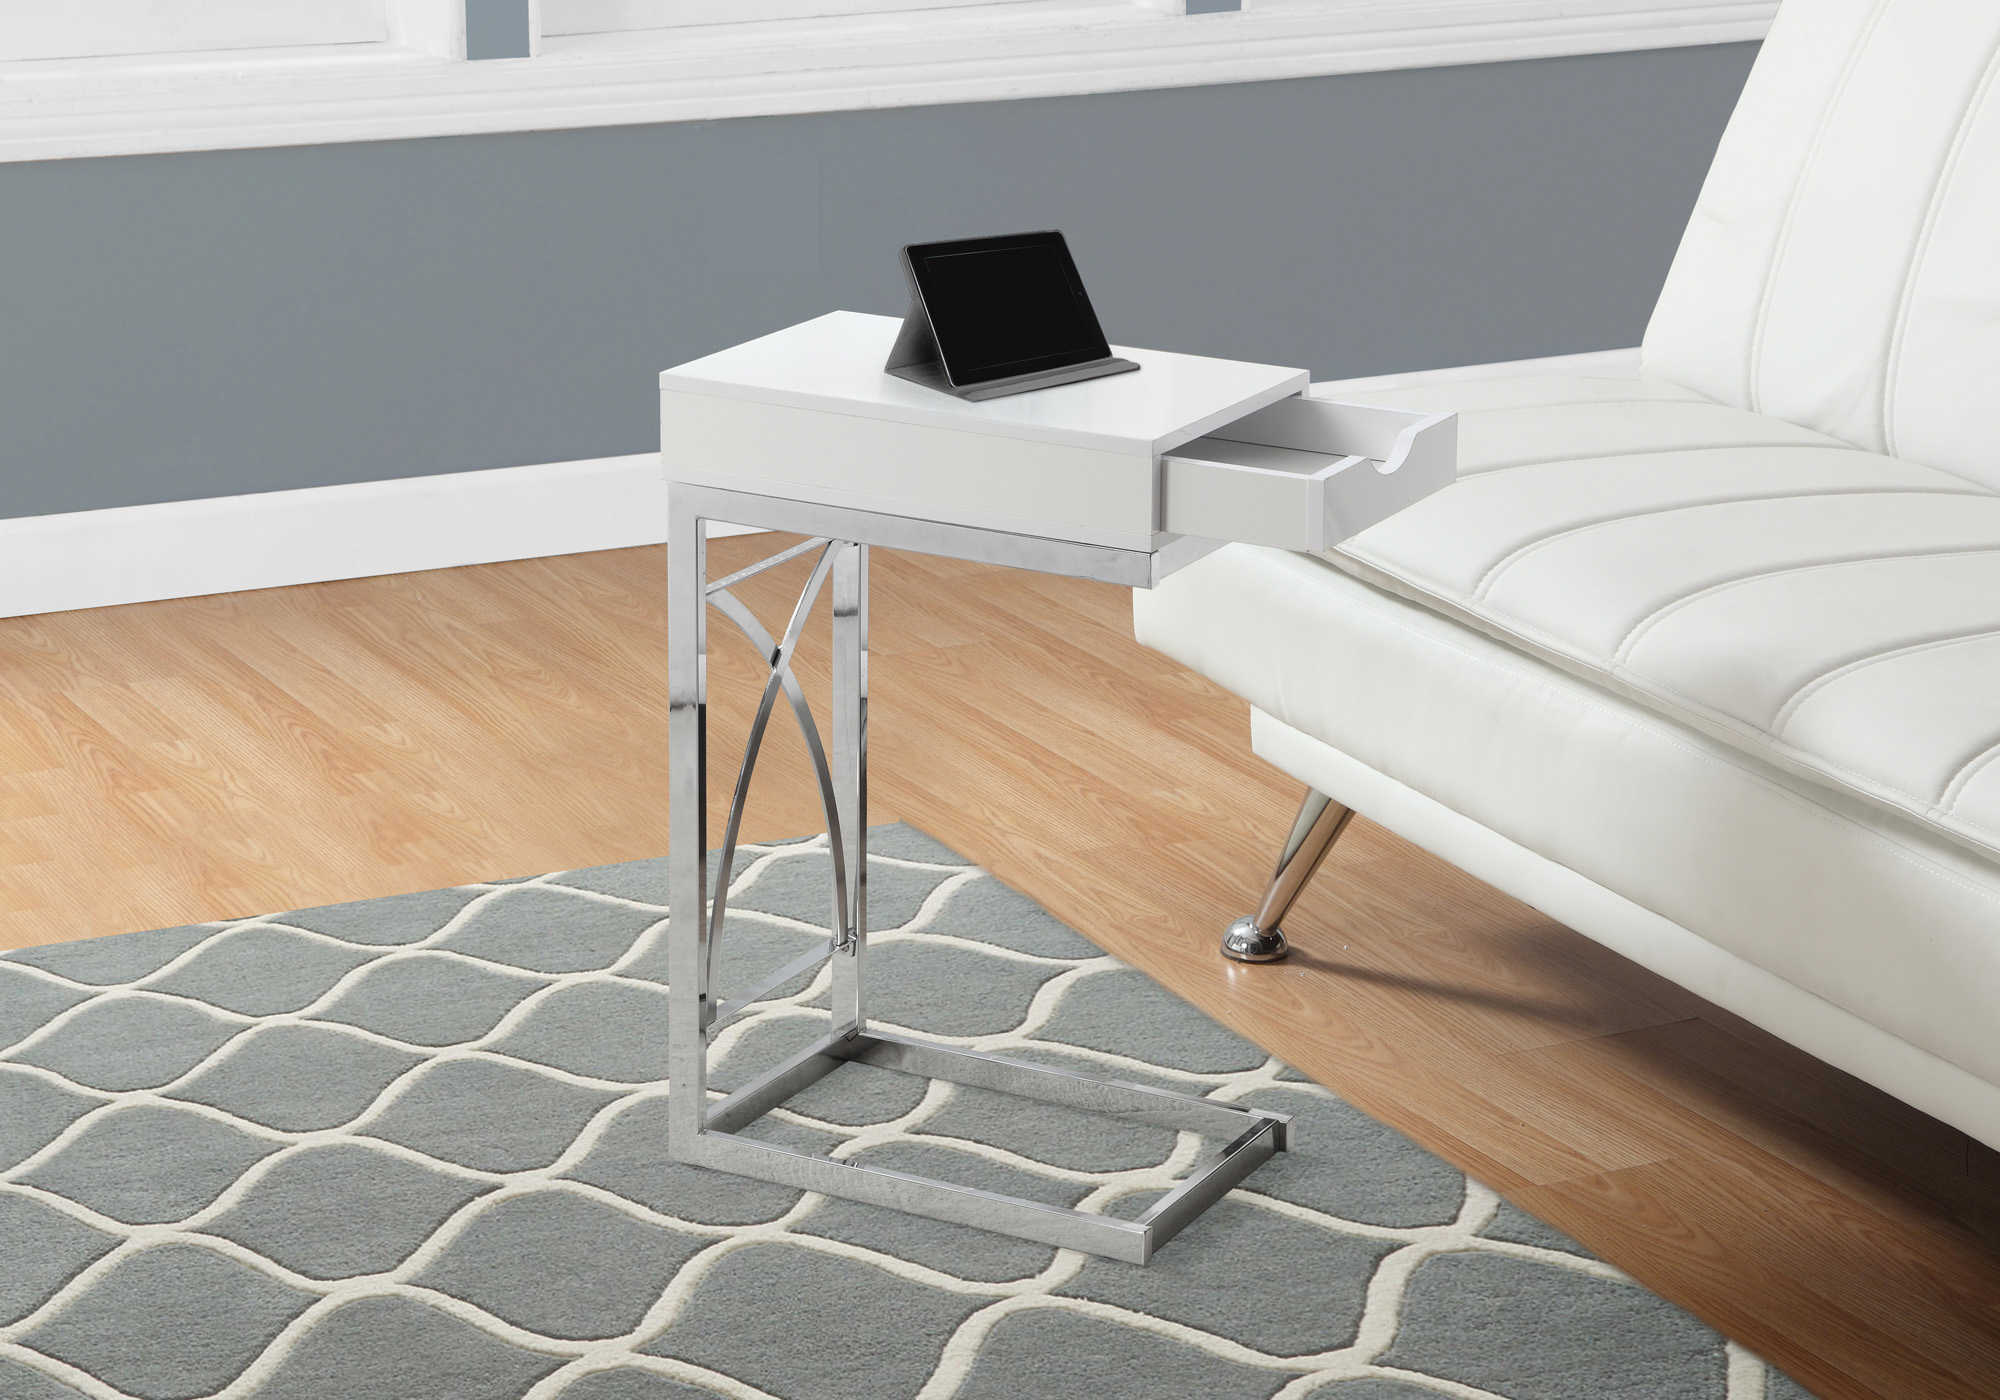 ACCENT TABLE - CHROME METAL / GLOSSY WHITE WITH A DRAWER